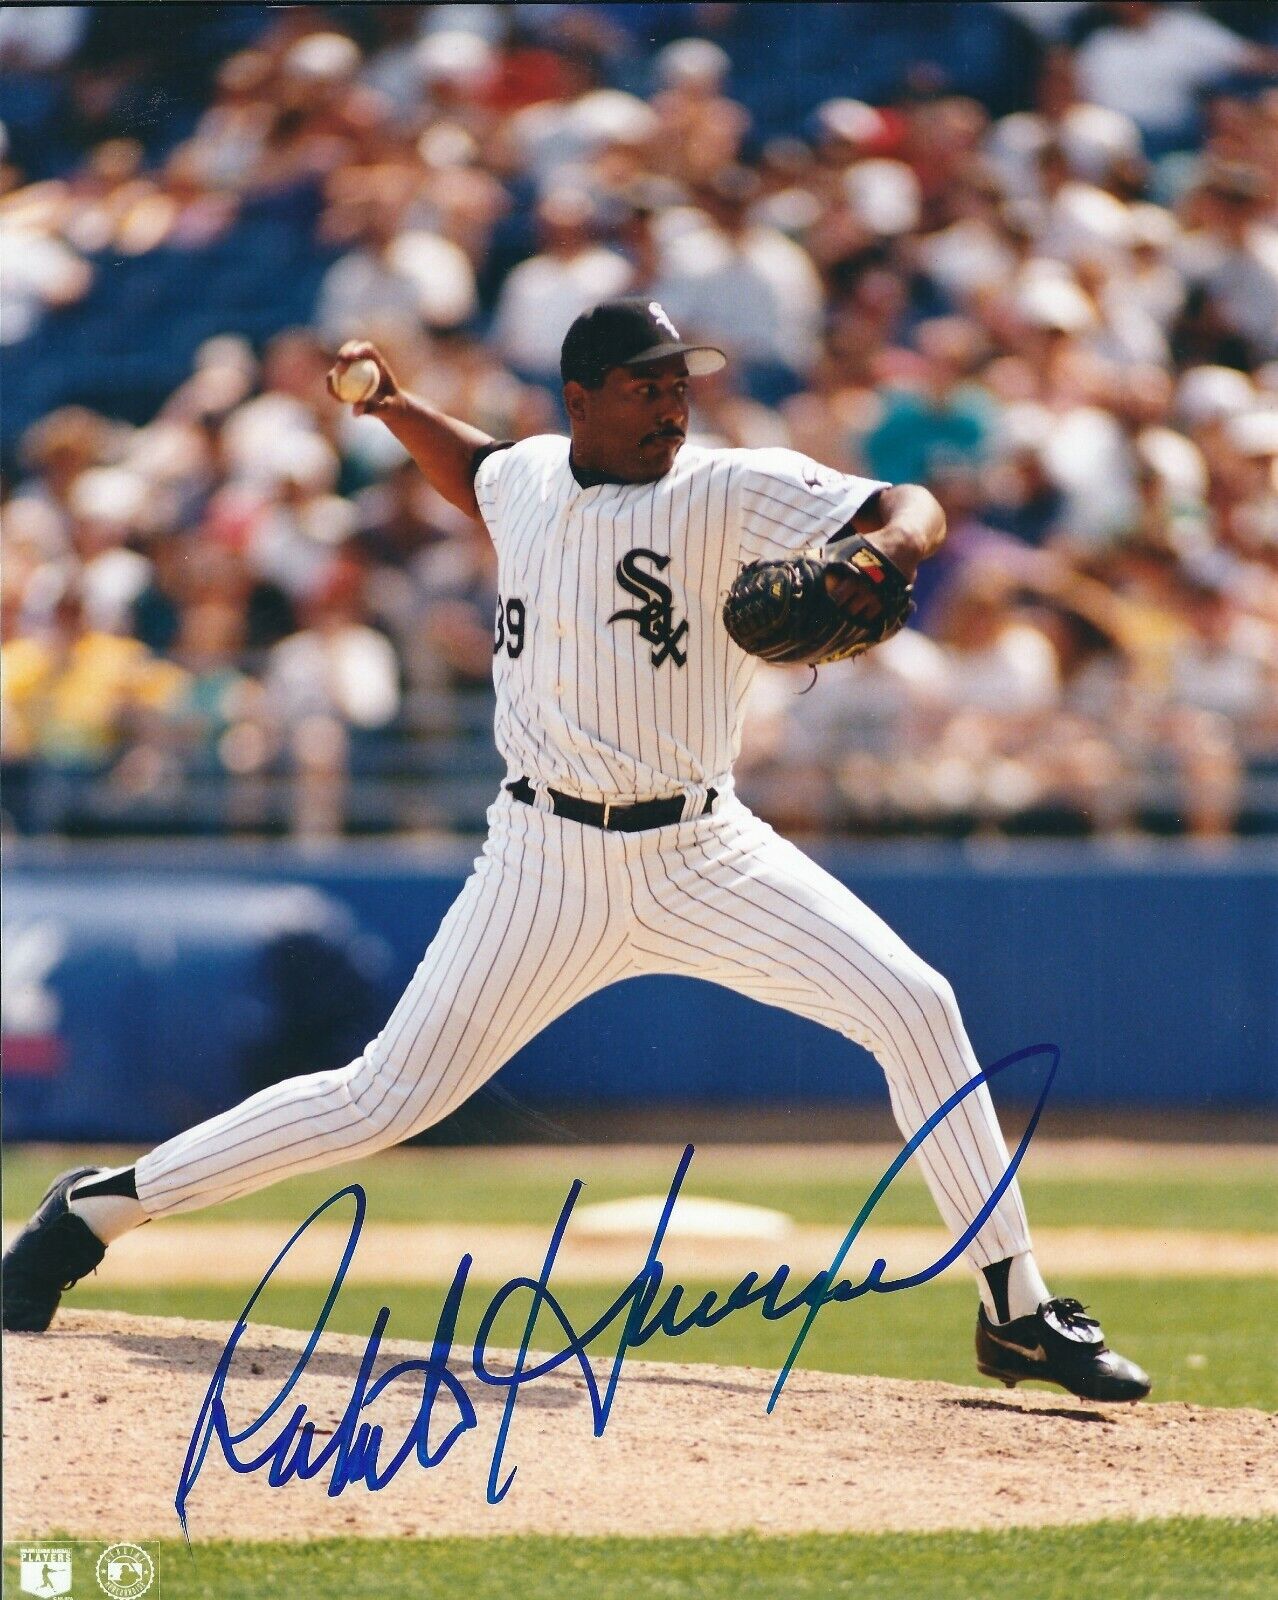 Signed 8x10 ROBERTO HERNANDEZ Chicago White Sox Autographed Photo Poster painting - COA